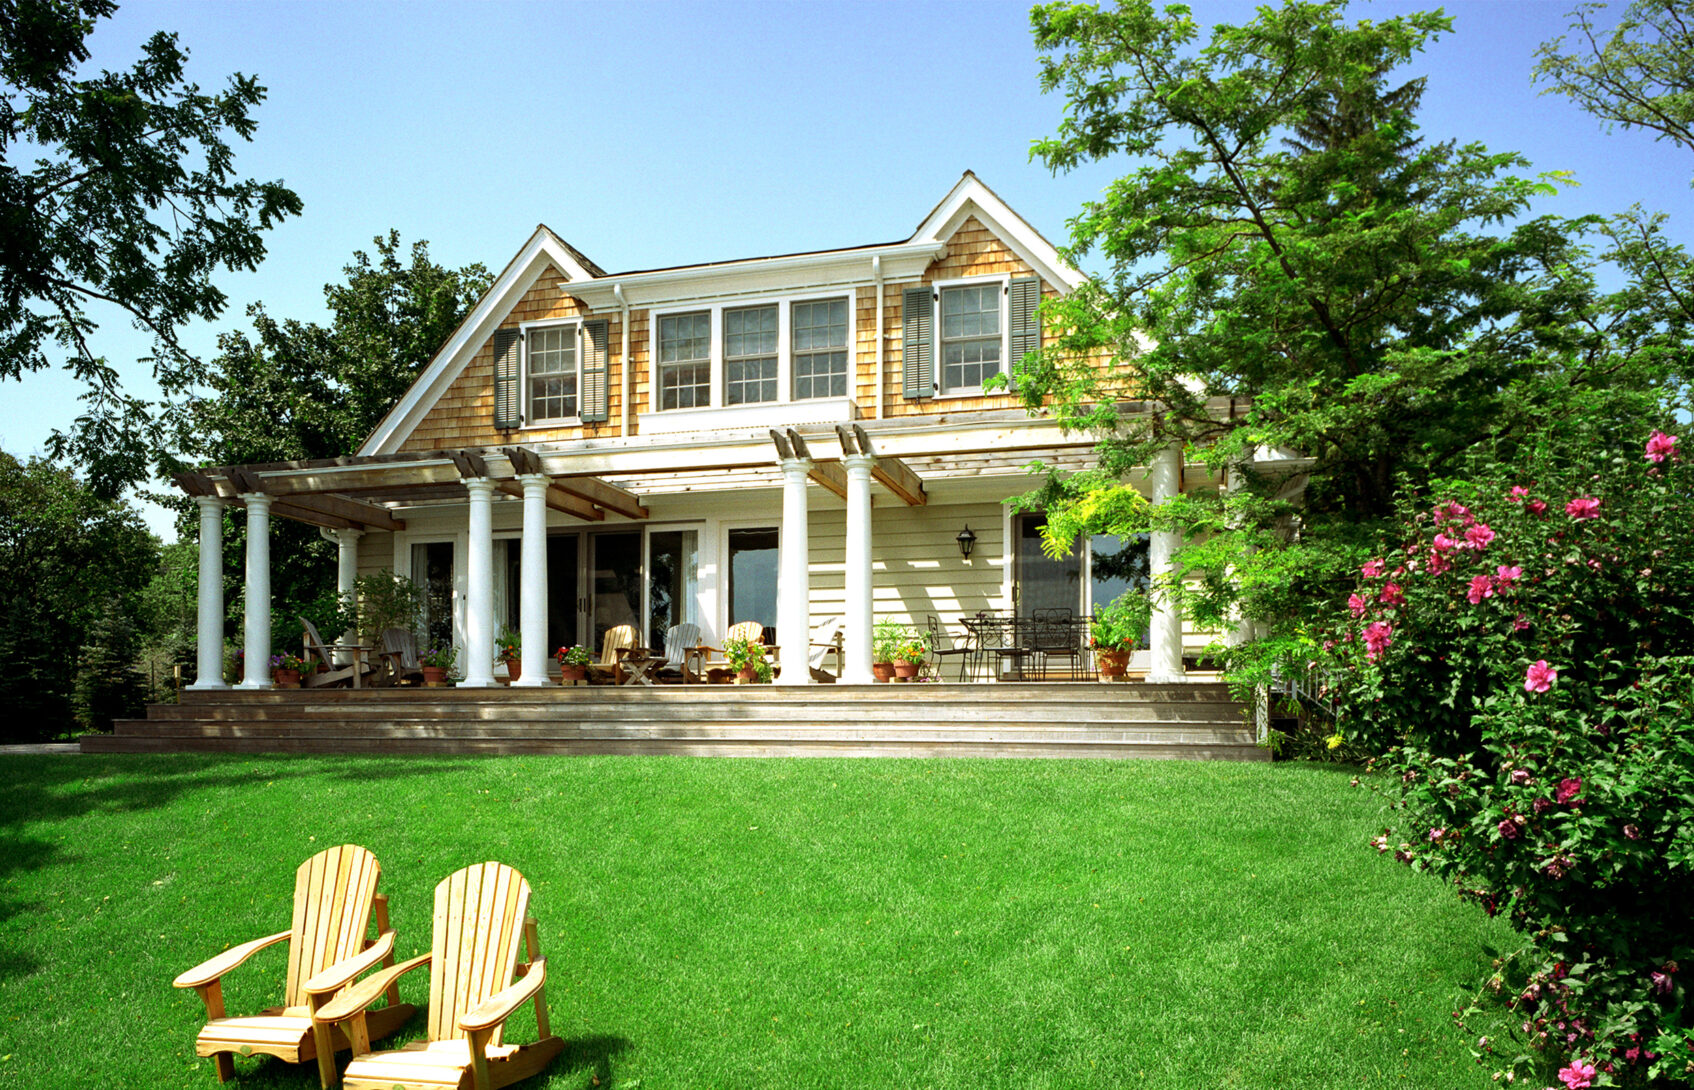 Adirondack chairs in front of a large yellow house with white columns